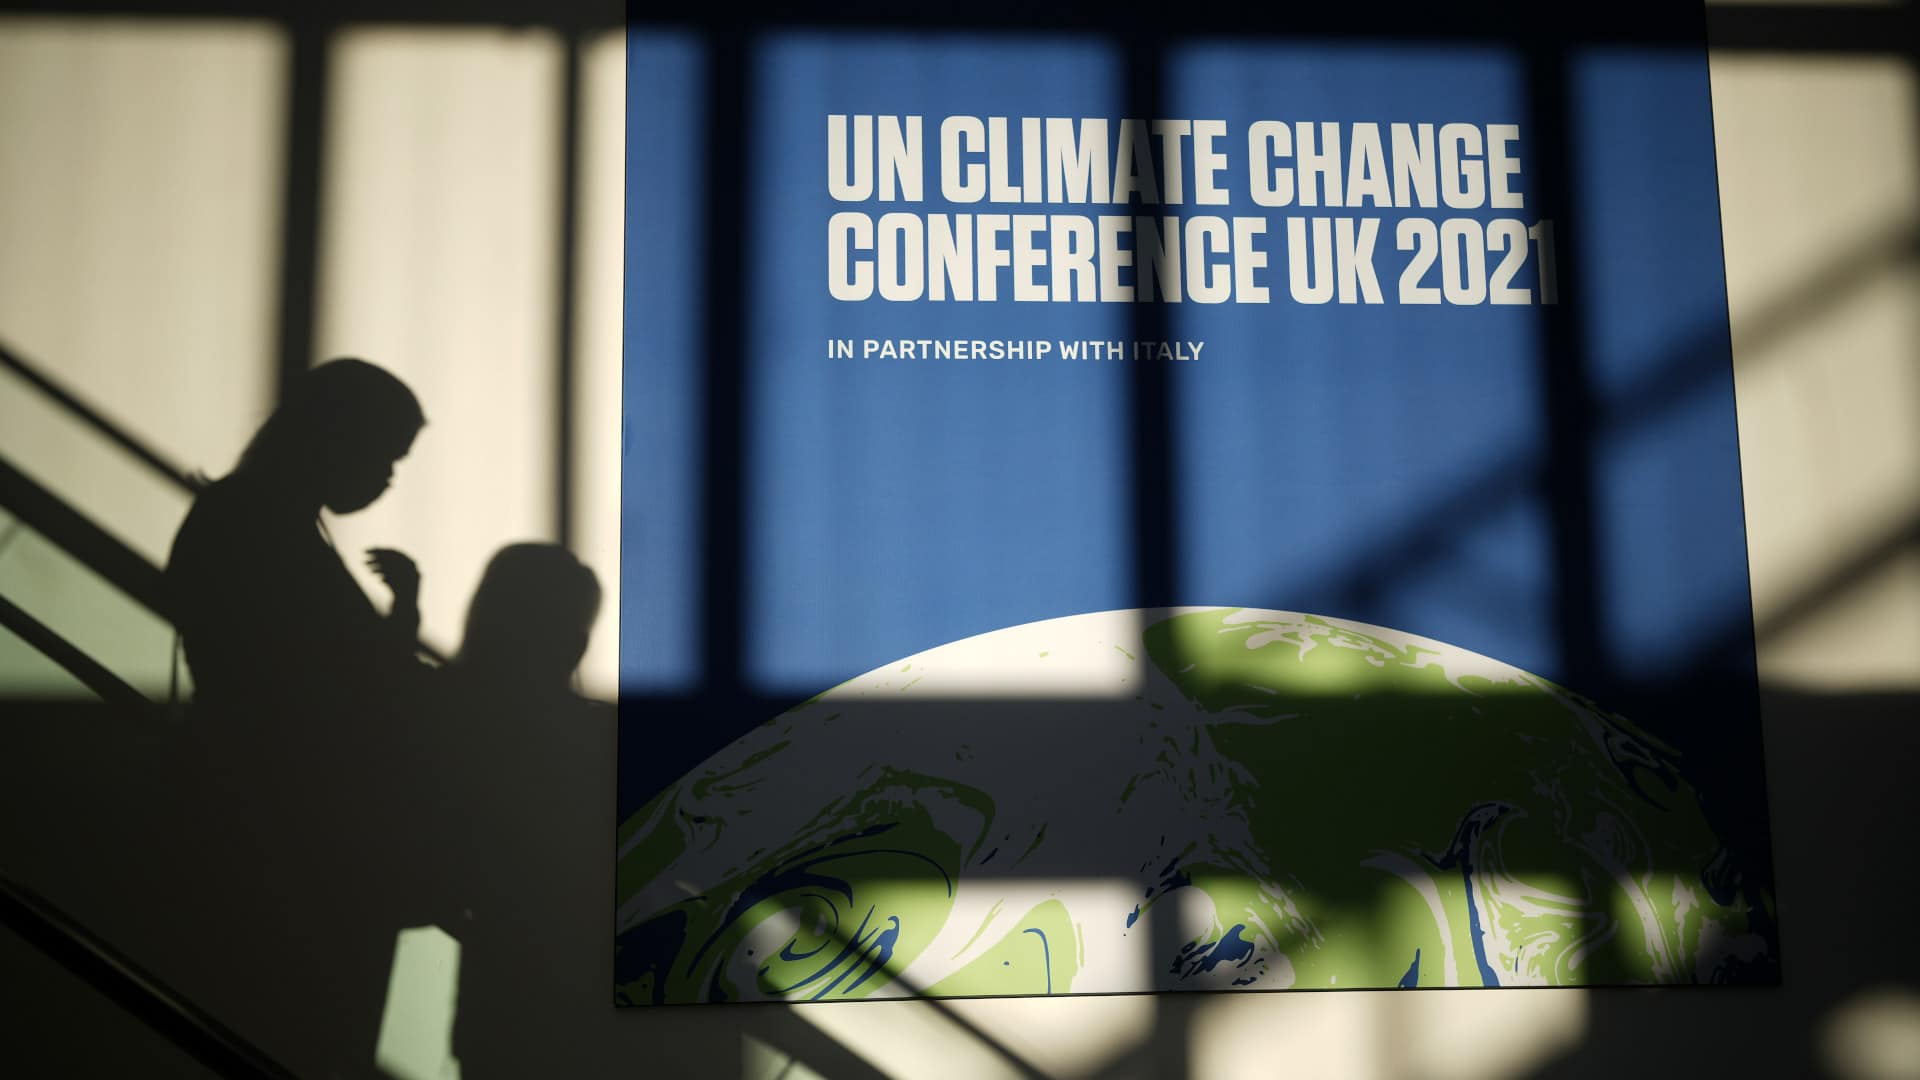 Delegates arrive to bright sunshine on Energy Day at the COP26 climate summit at the SEC on Nov. 4, 2021 in Glasgow, Scotland.